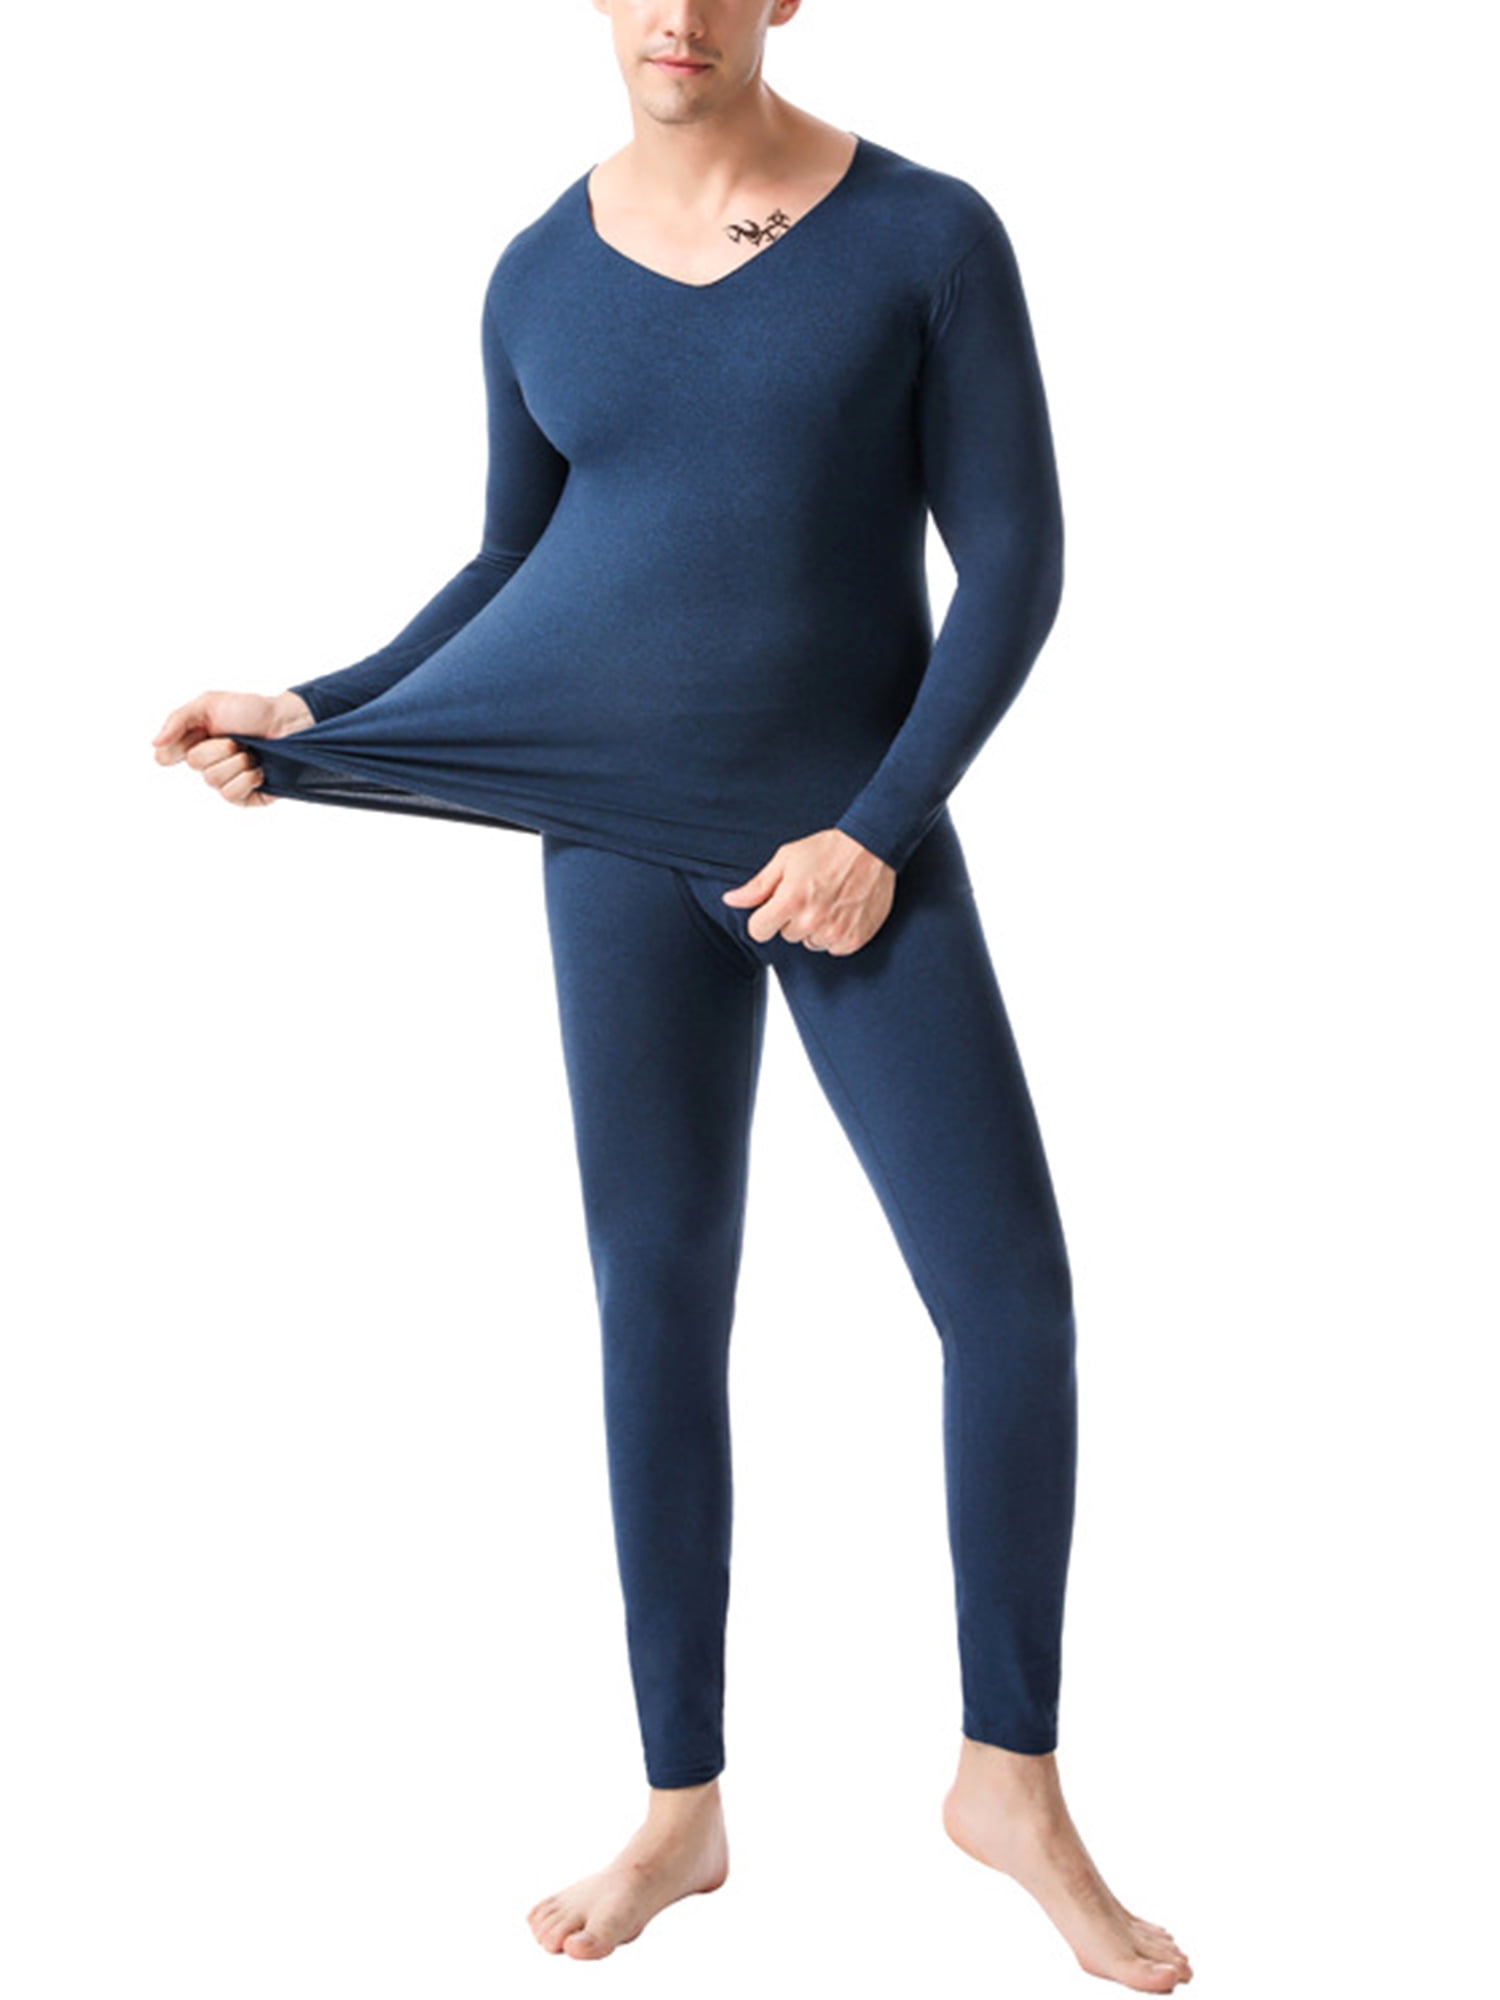 2 X Men Gents Boys  BLUE Thermal LONG JOHNS  Brushed Inside For Extra Warmth 